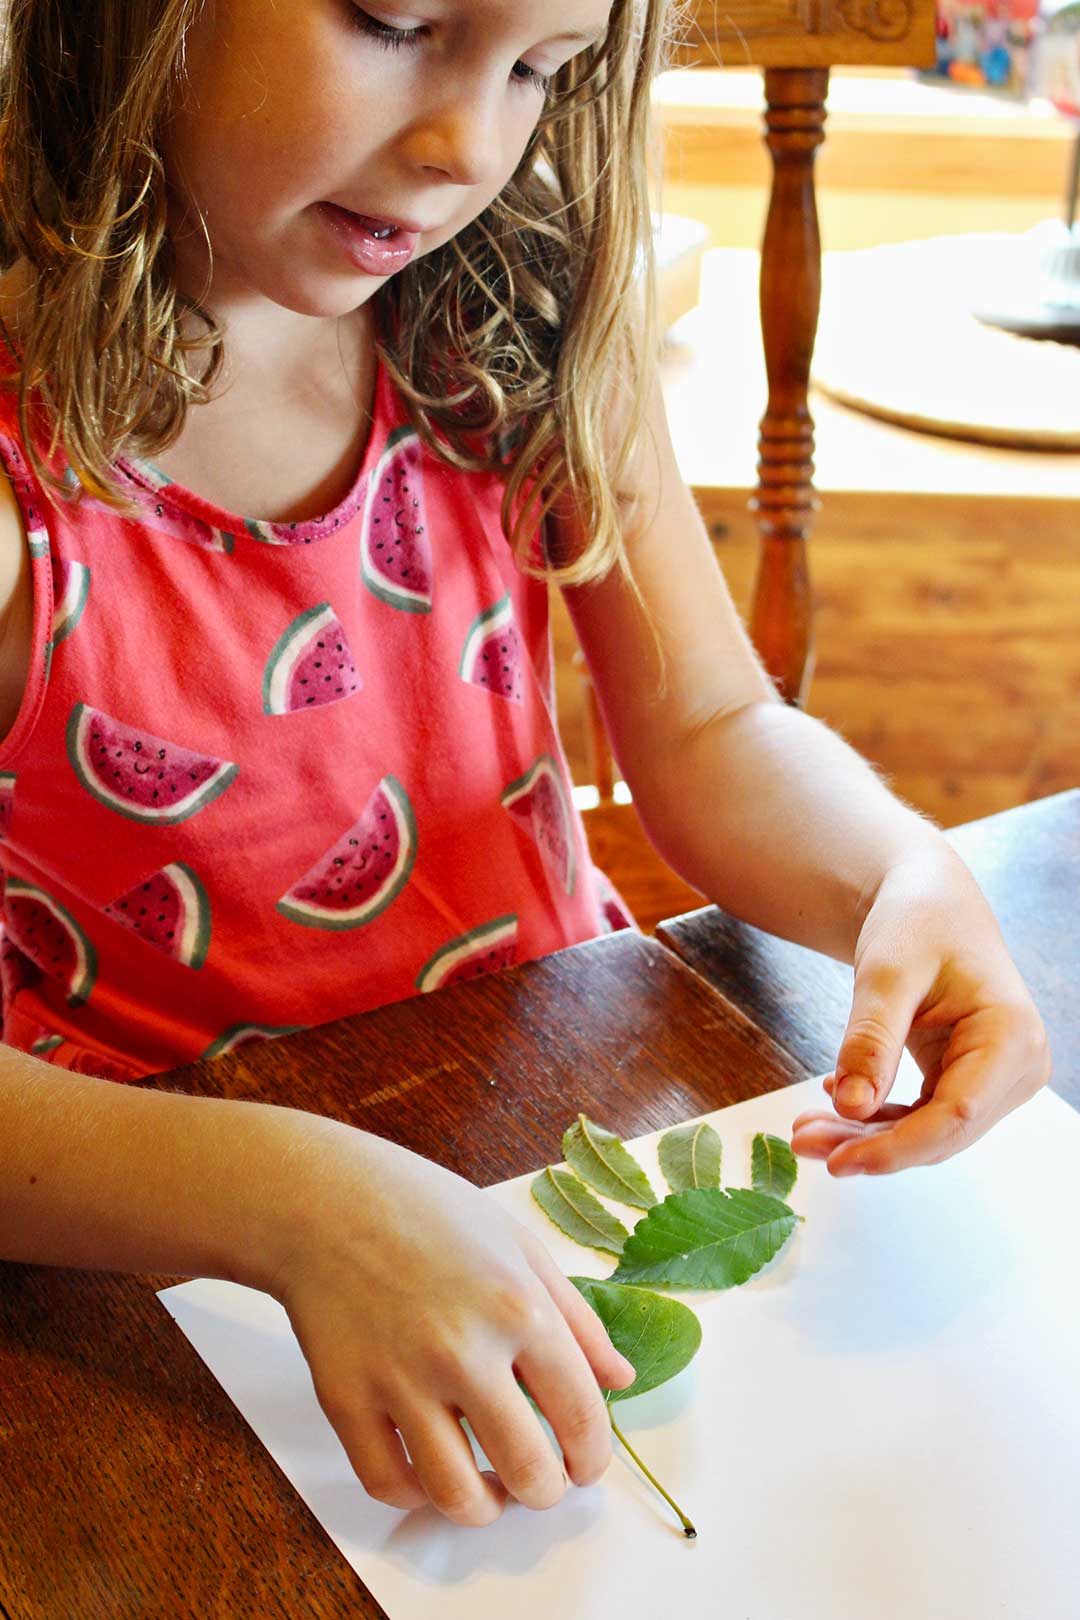 Girl wearing red dress with watermelons starts putting together her leaf collage on white paper.